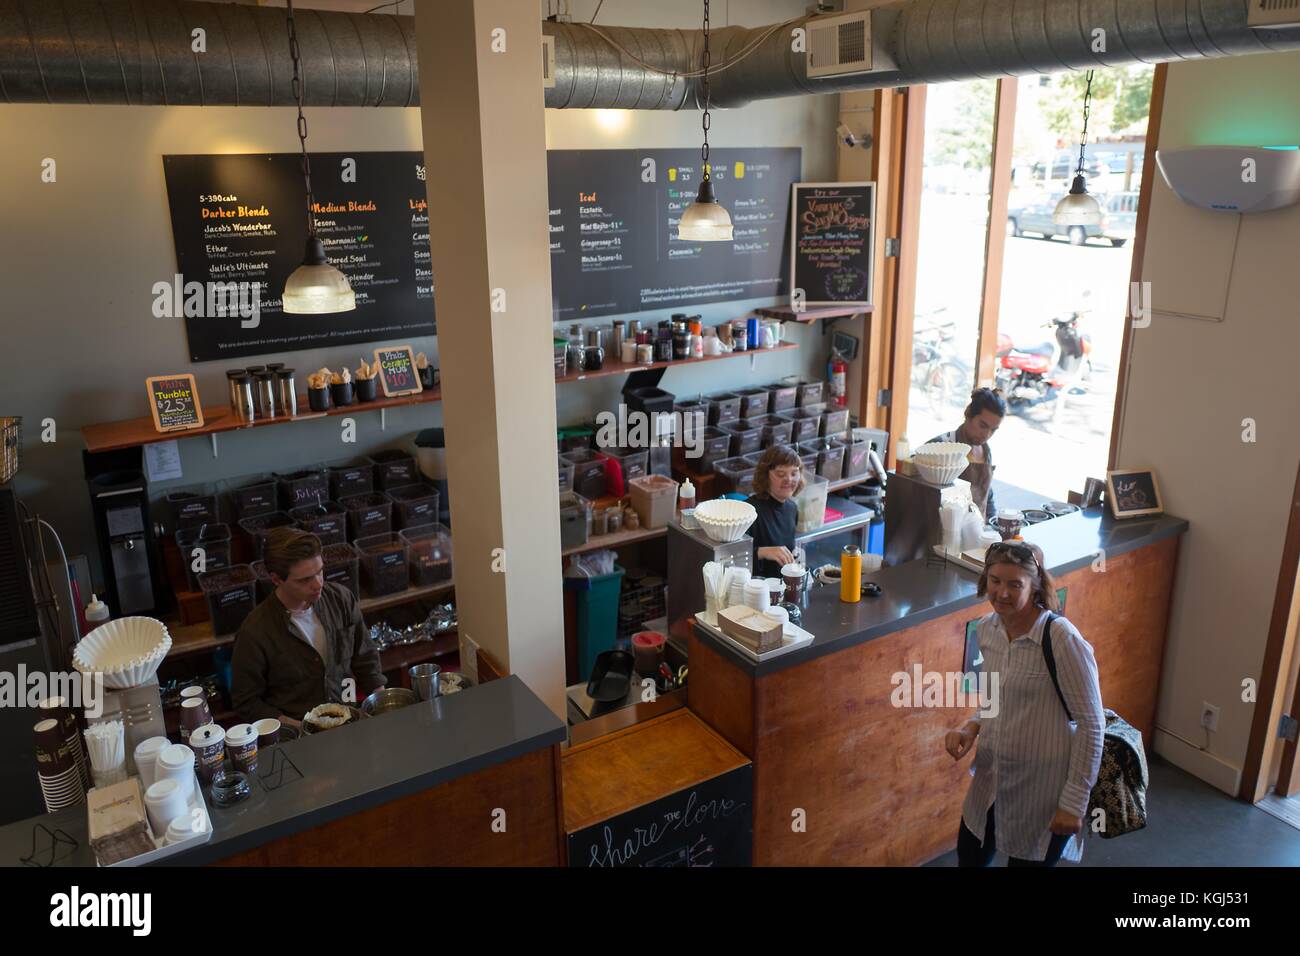 Overhead view of baristas preparing coffee and customers shopping at Philz Coffee, a popular California-based pour over artisan coffee chain in the Gourmet Ghetto (North Shattuck) neighborhood of Berkeley, California, October 6, 2017. () Stock Photo